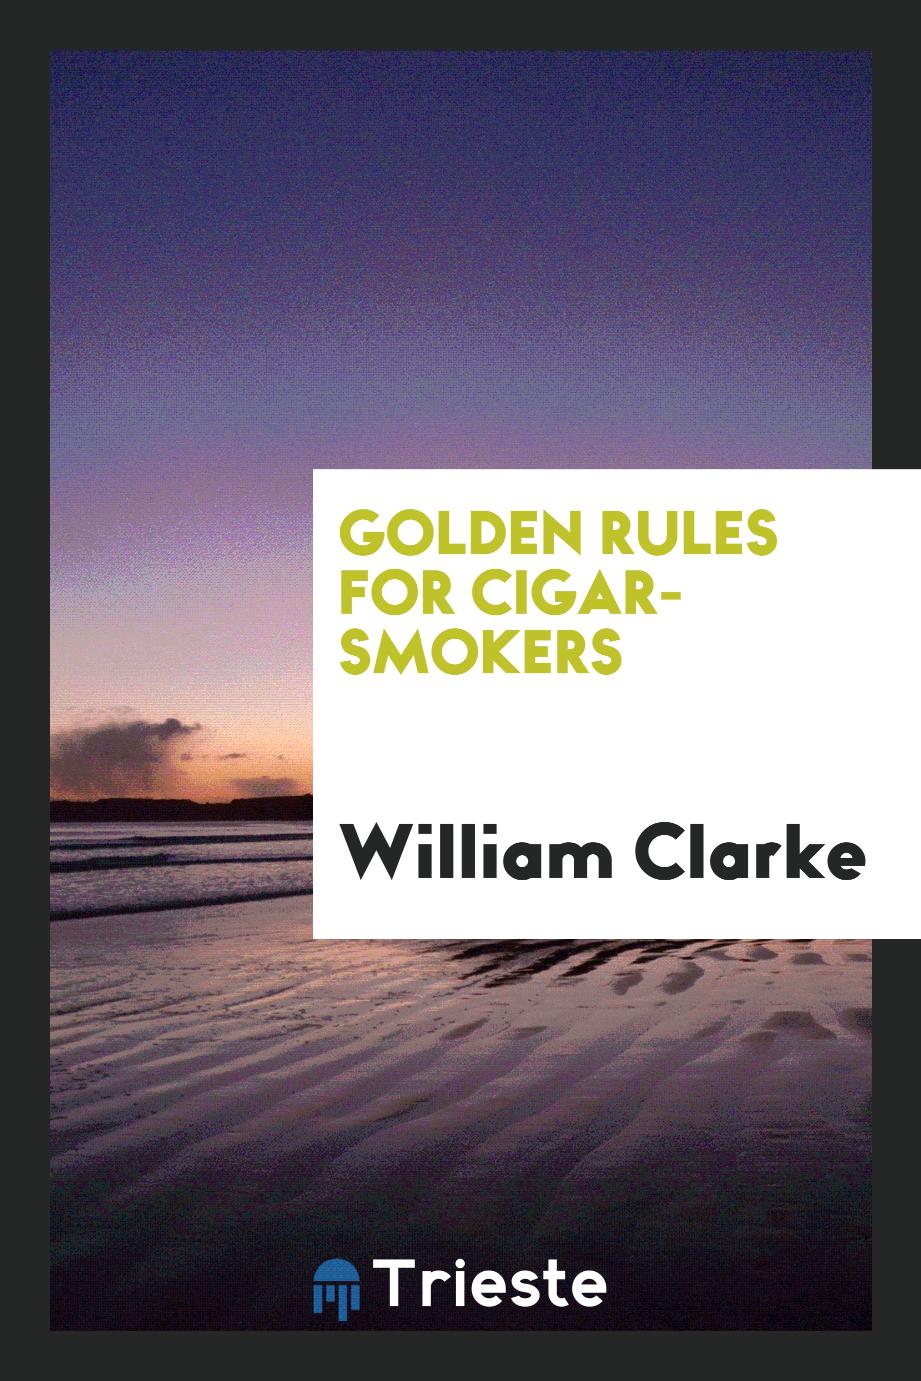 Golden rules for cigar-smokers